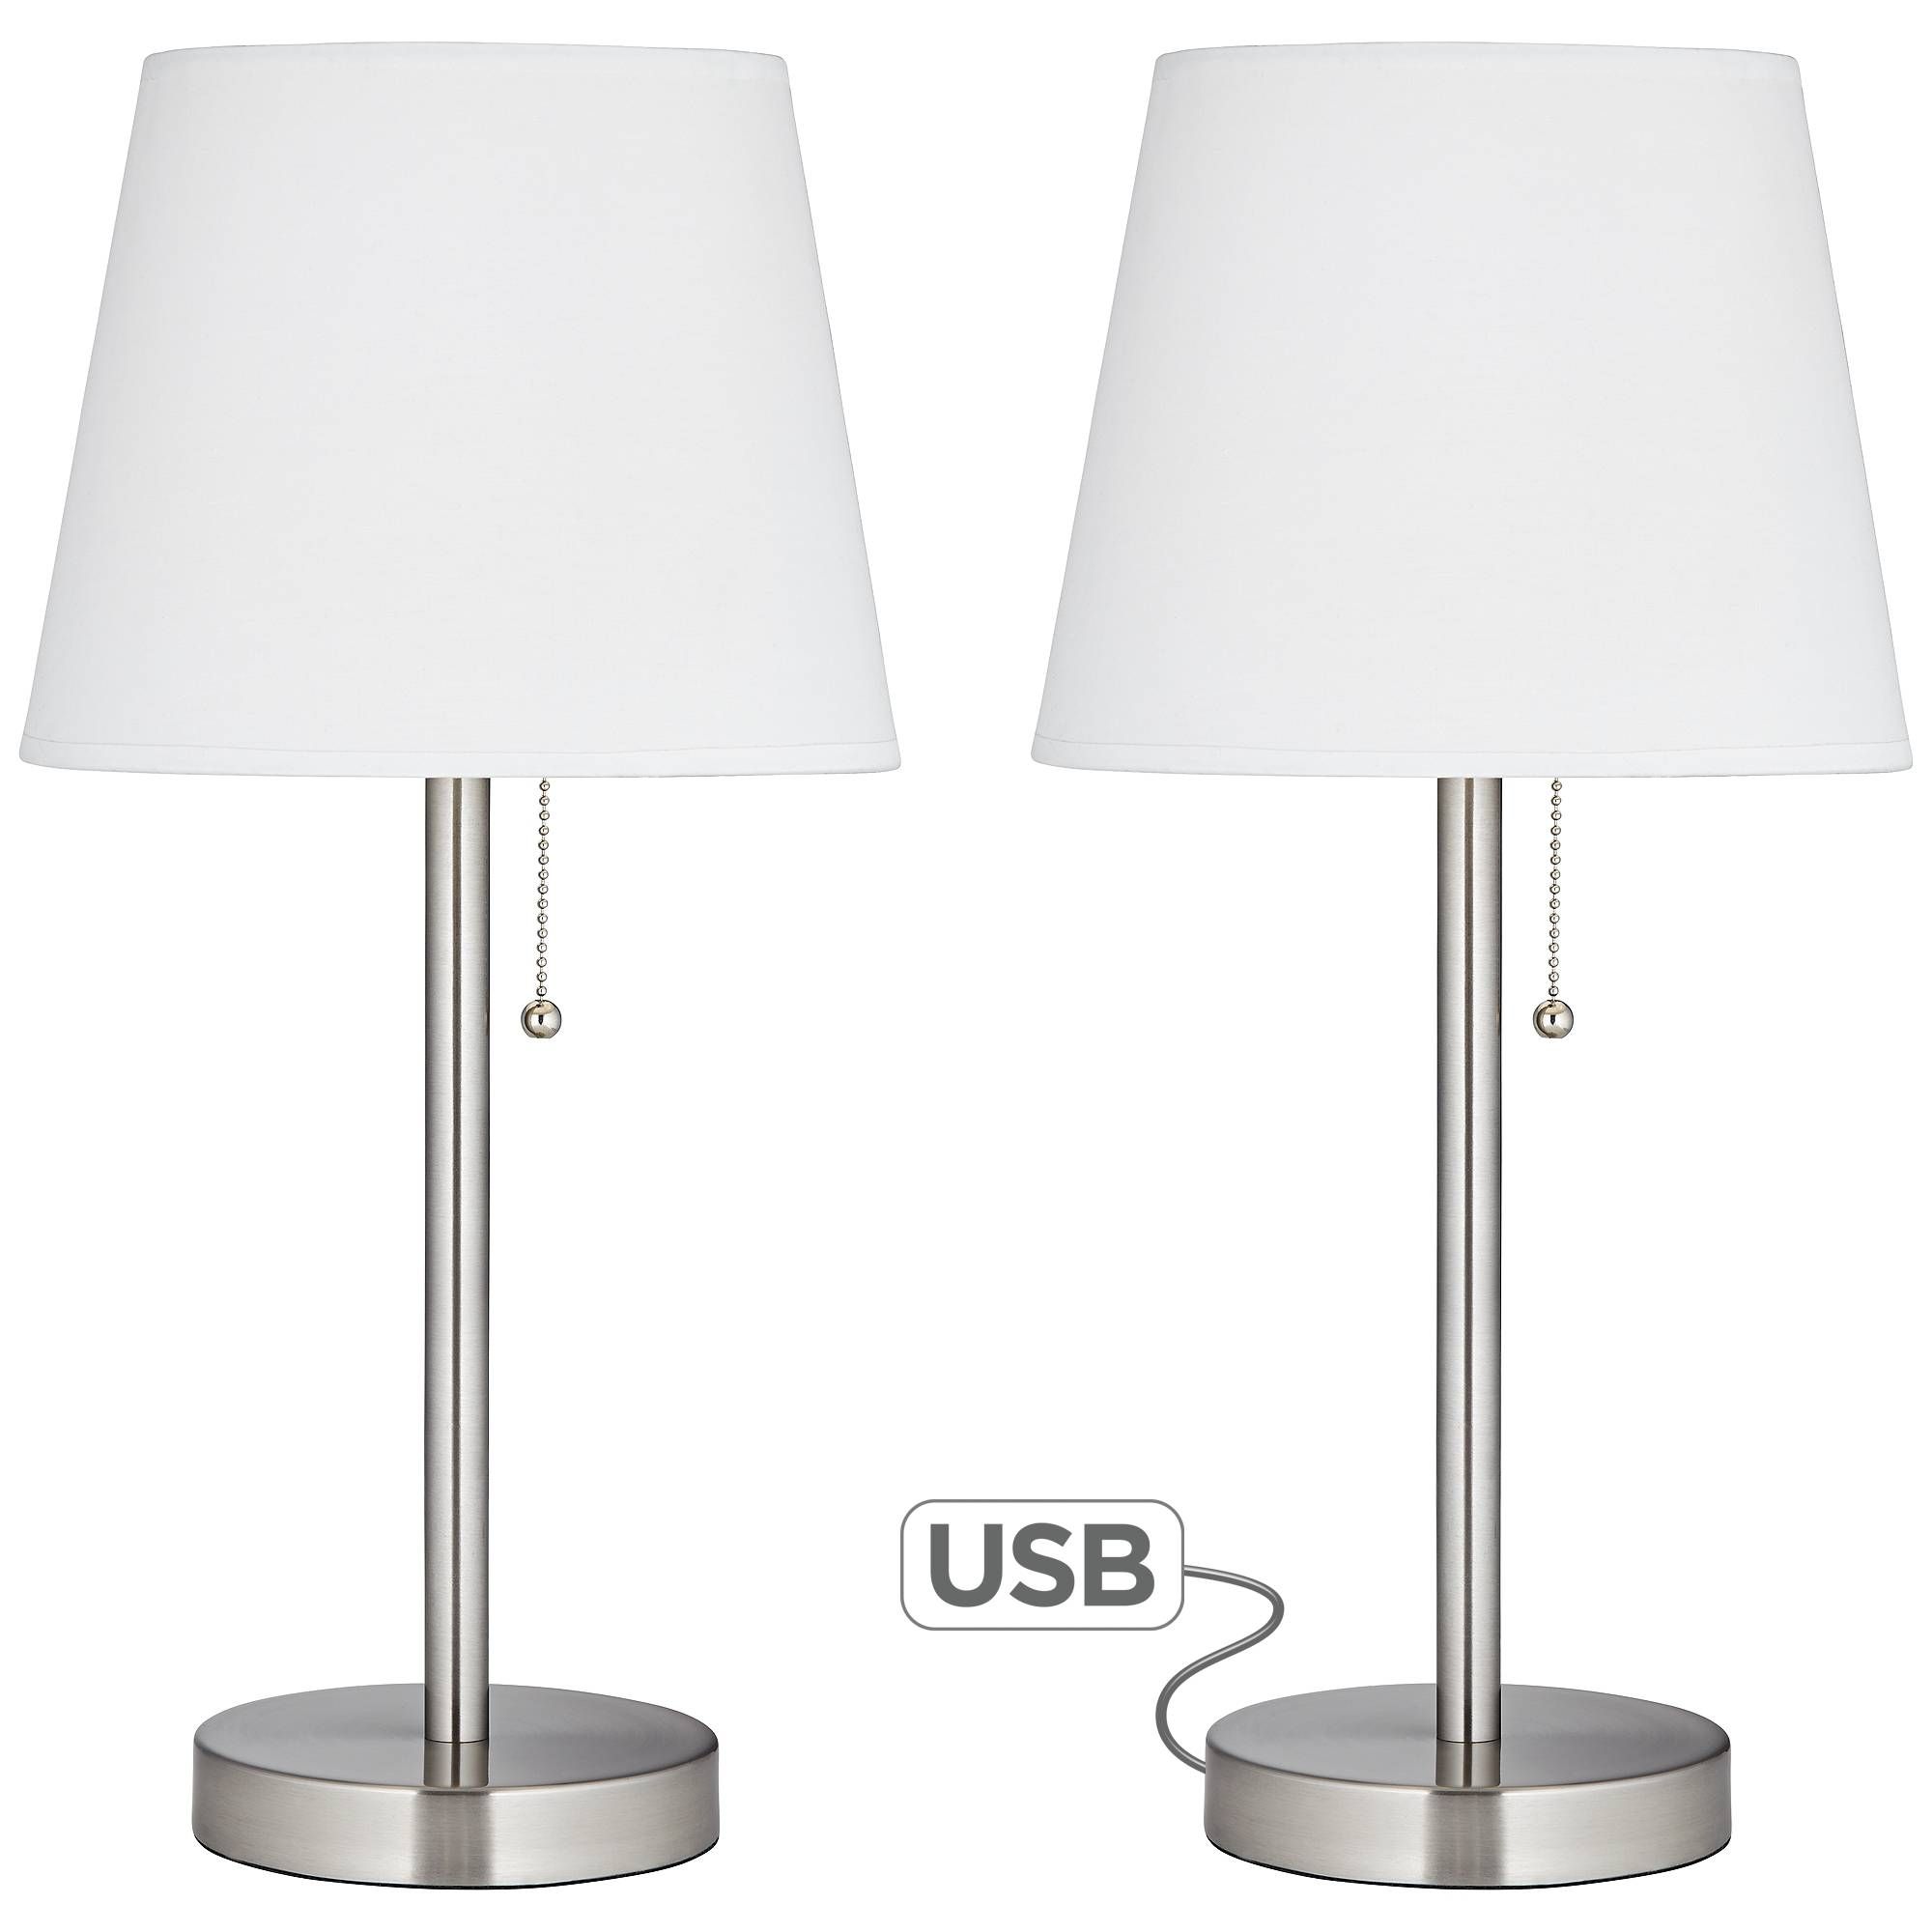 flesner utility plug usb brushed steel table lamp set style accent with port chinese ginger jar lamps gold pottery barn bath outside umbrella ikea storage cupboards dog grooming